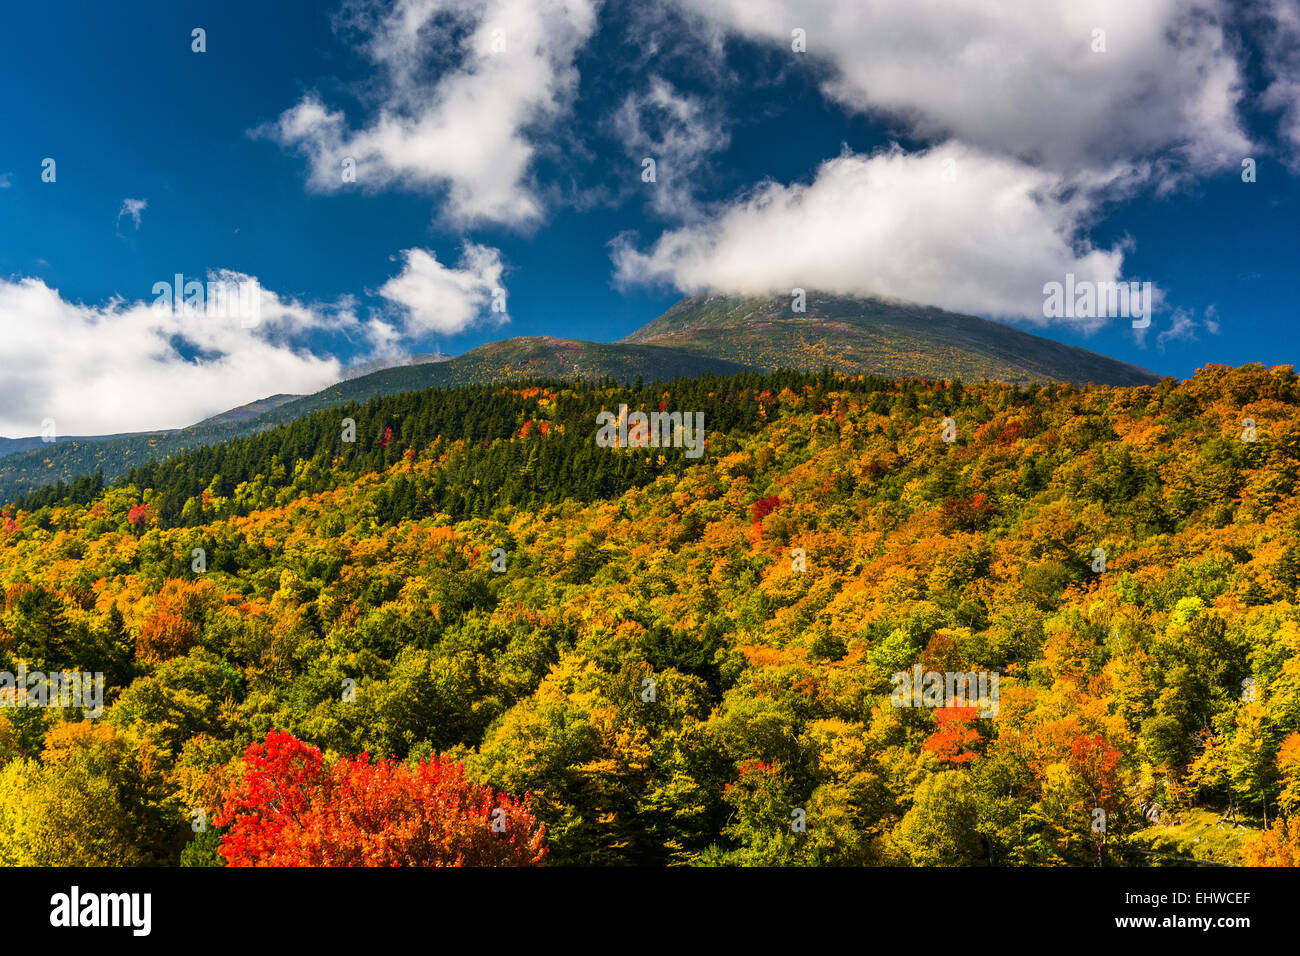 Autumn color and view of the Presidential Range in White Mountain National Forest, New Hampshire. Stock Photo